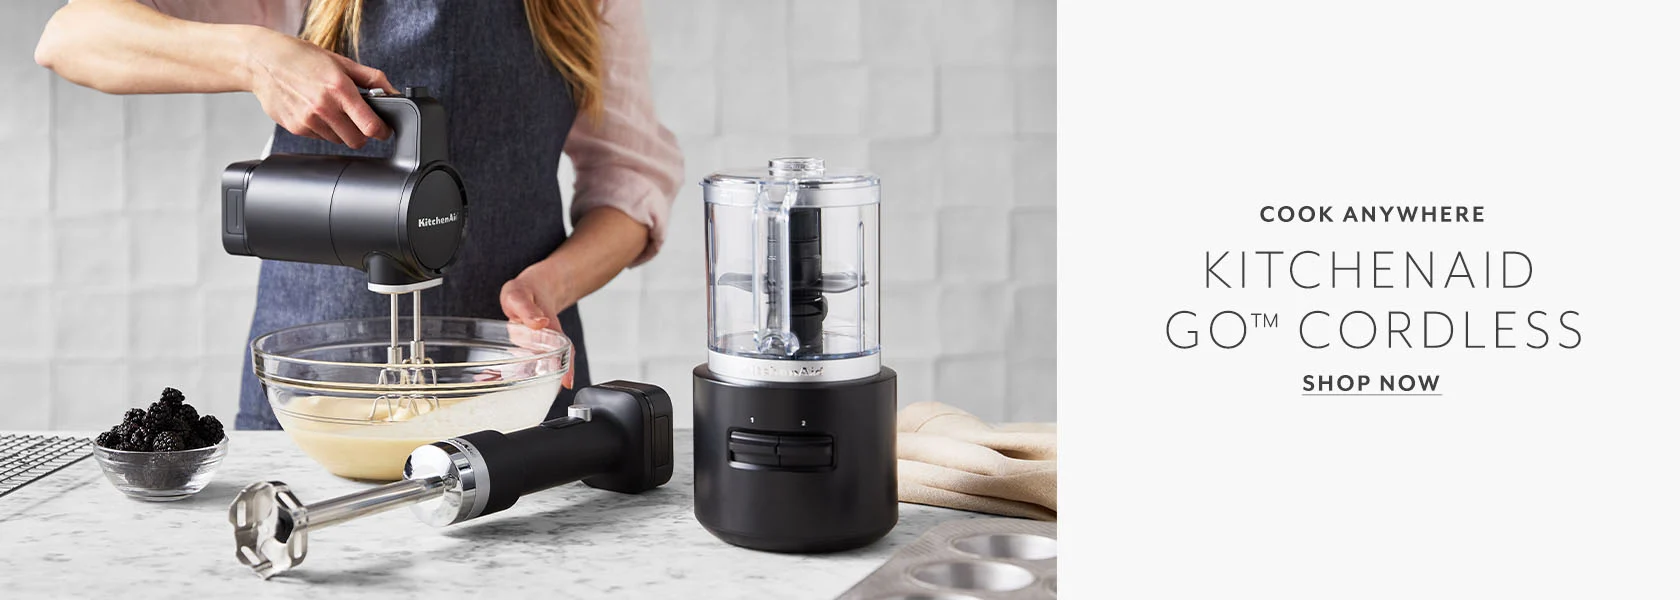 Cook anywhere with New KitchenAid Go Cordless small appliances, shop now.